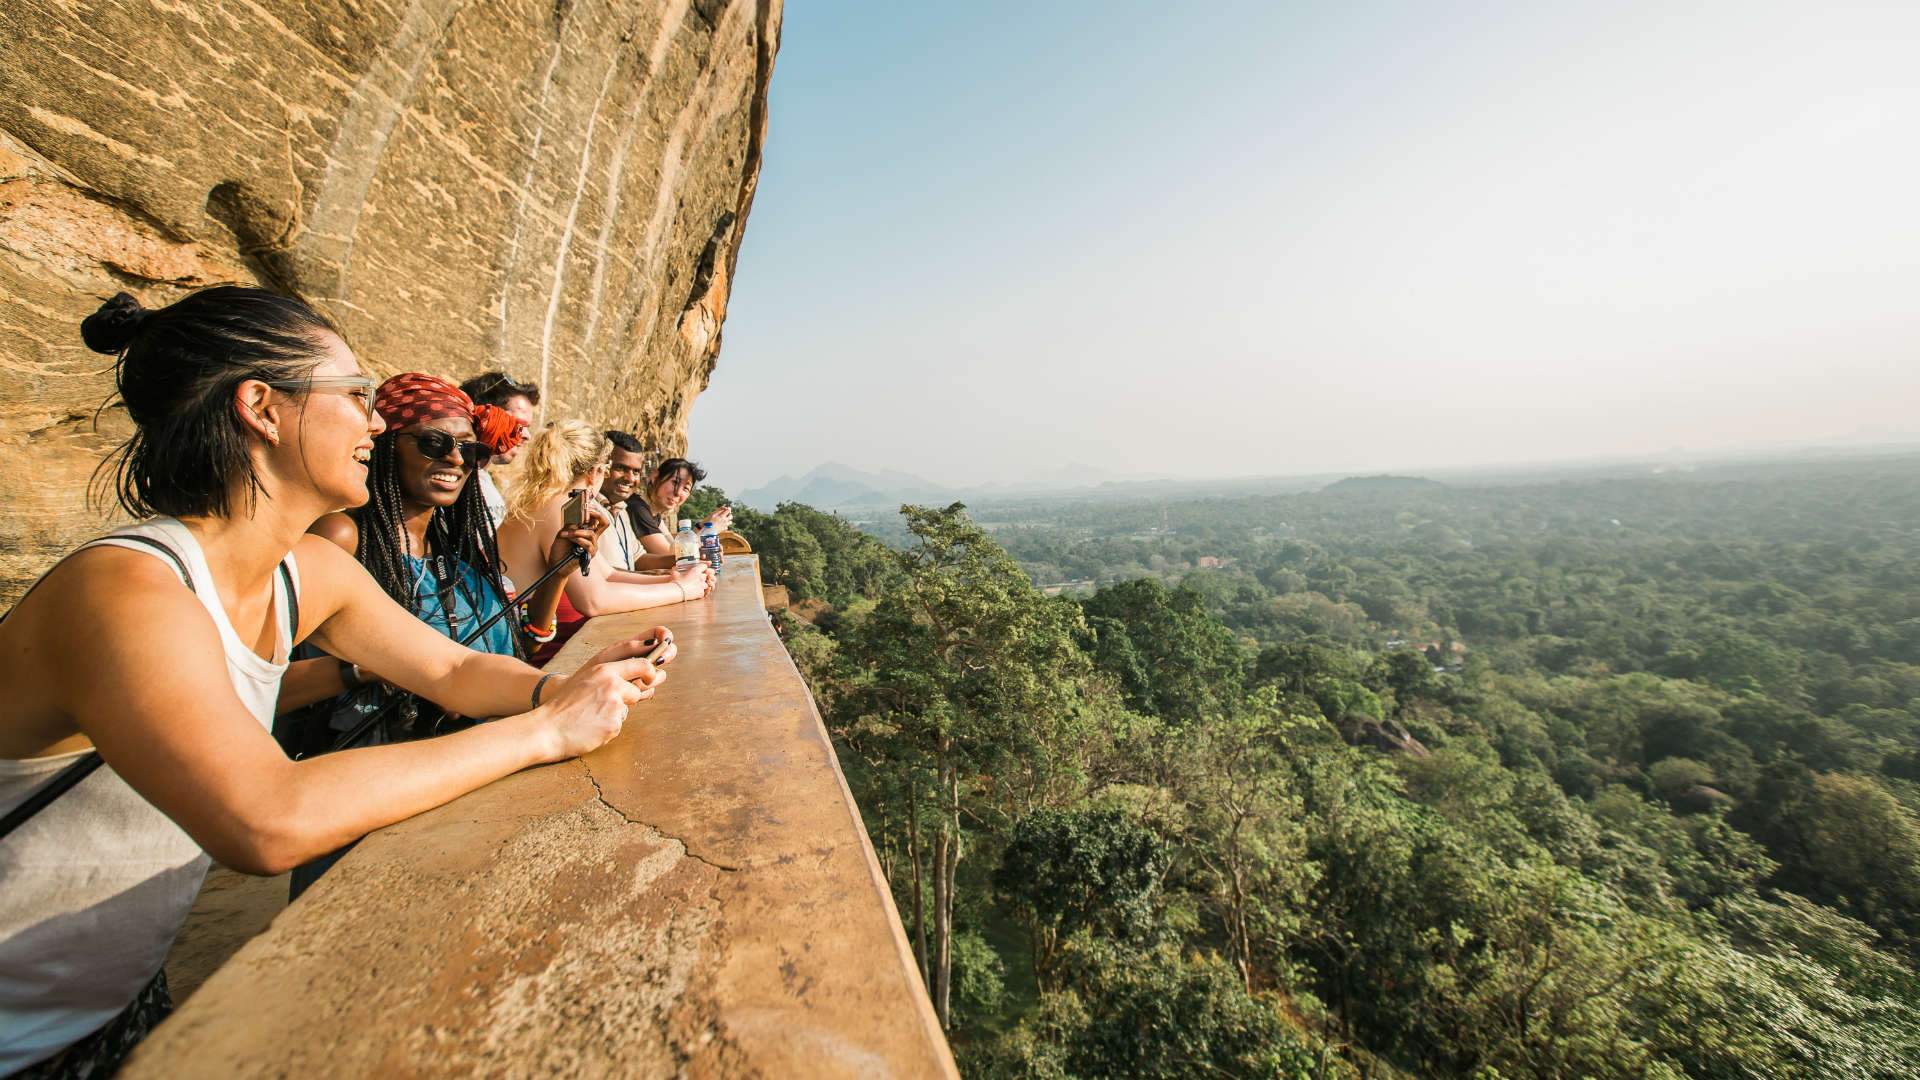 We're Giving Away an Activity-Filled Trip for Two to Sri Lanka